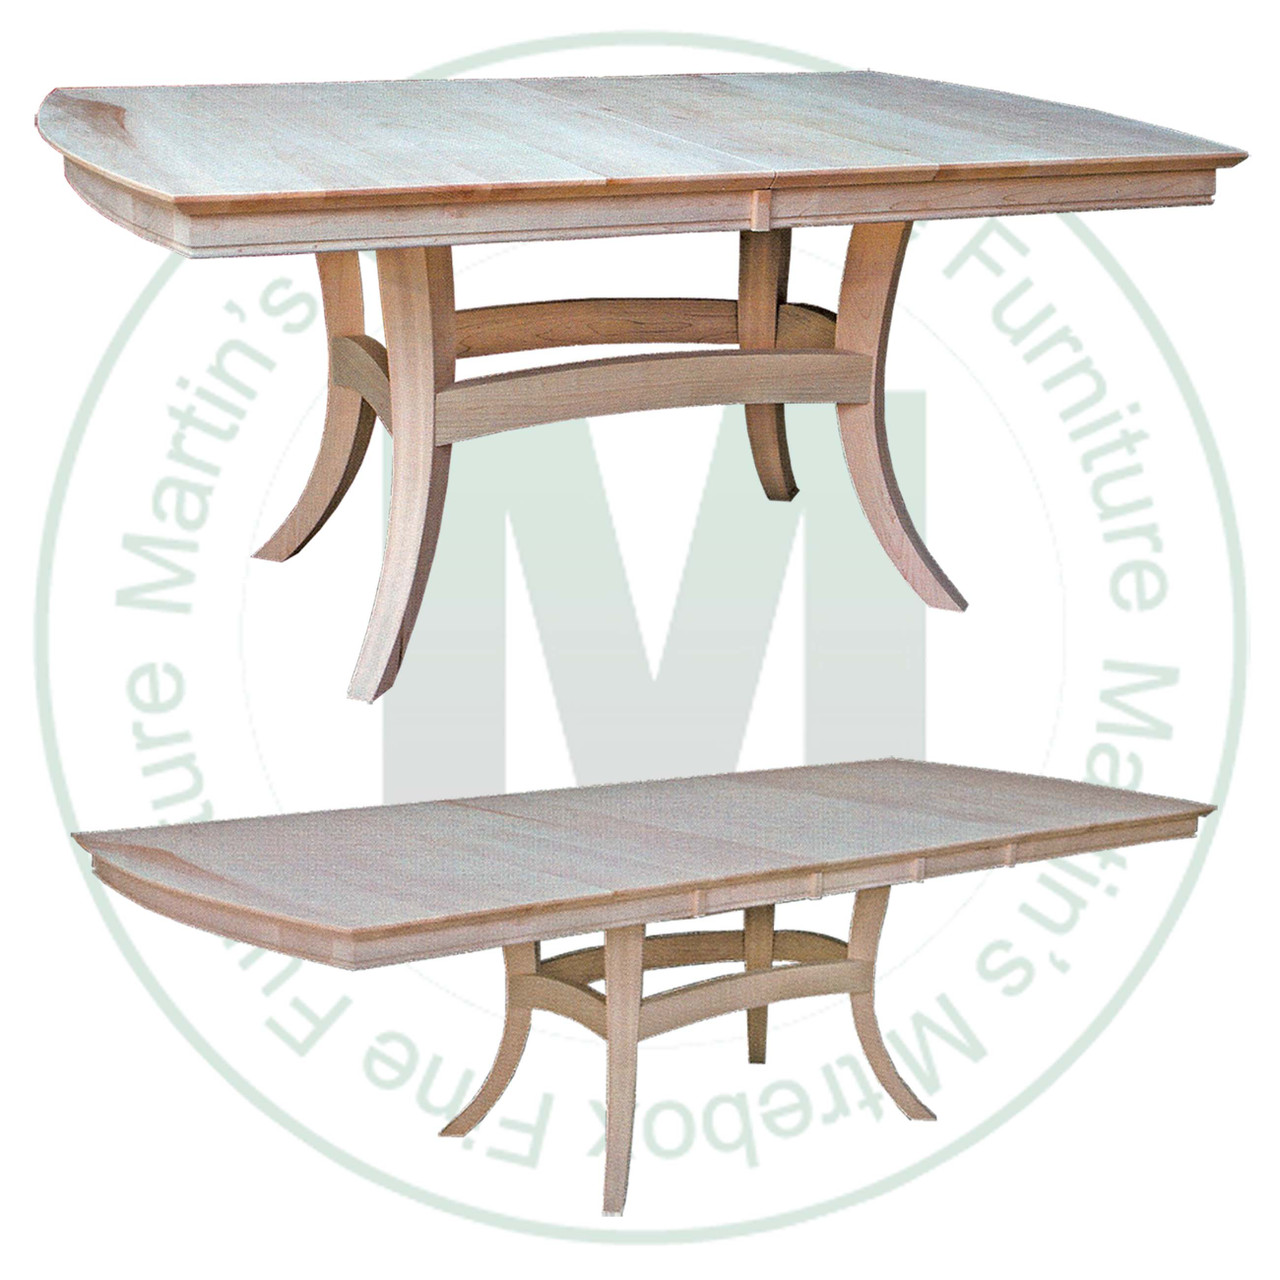 Maple Tokyo Double Pedestal Table 48''D x 84''W x 30''H With 4 - 12'' Leaves